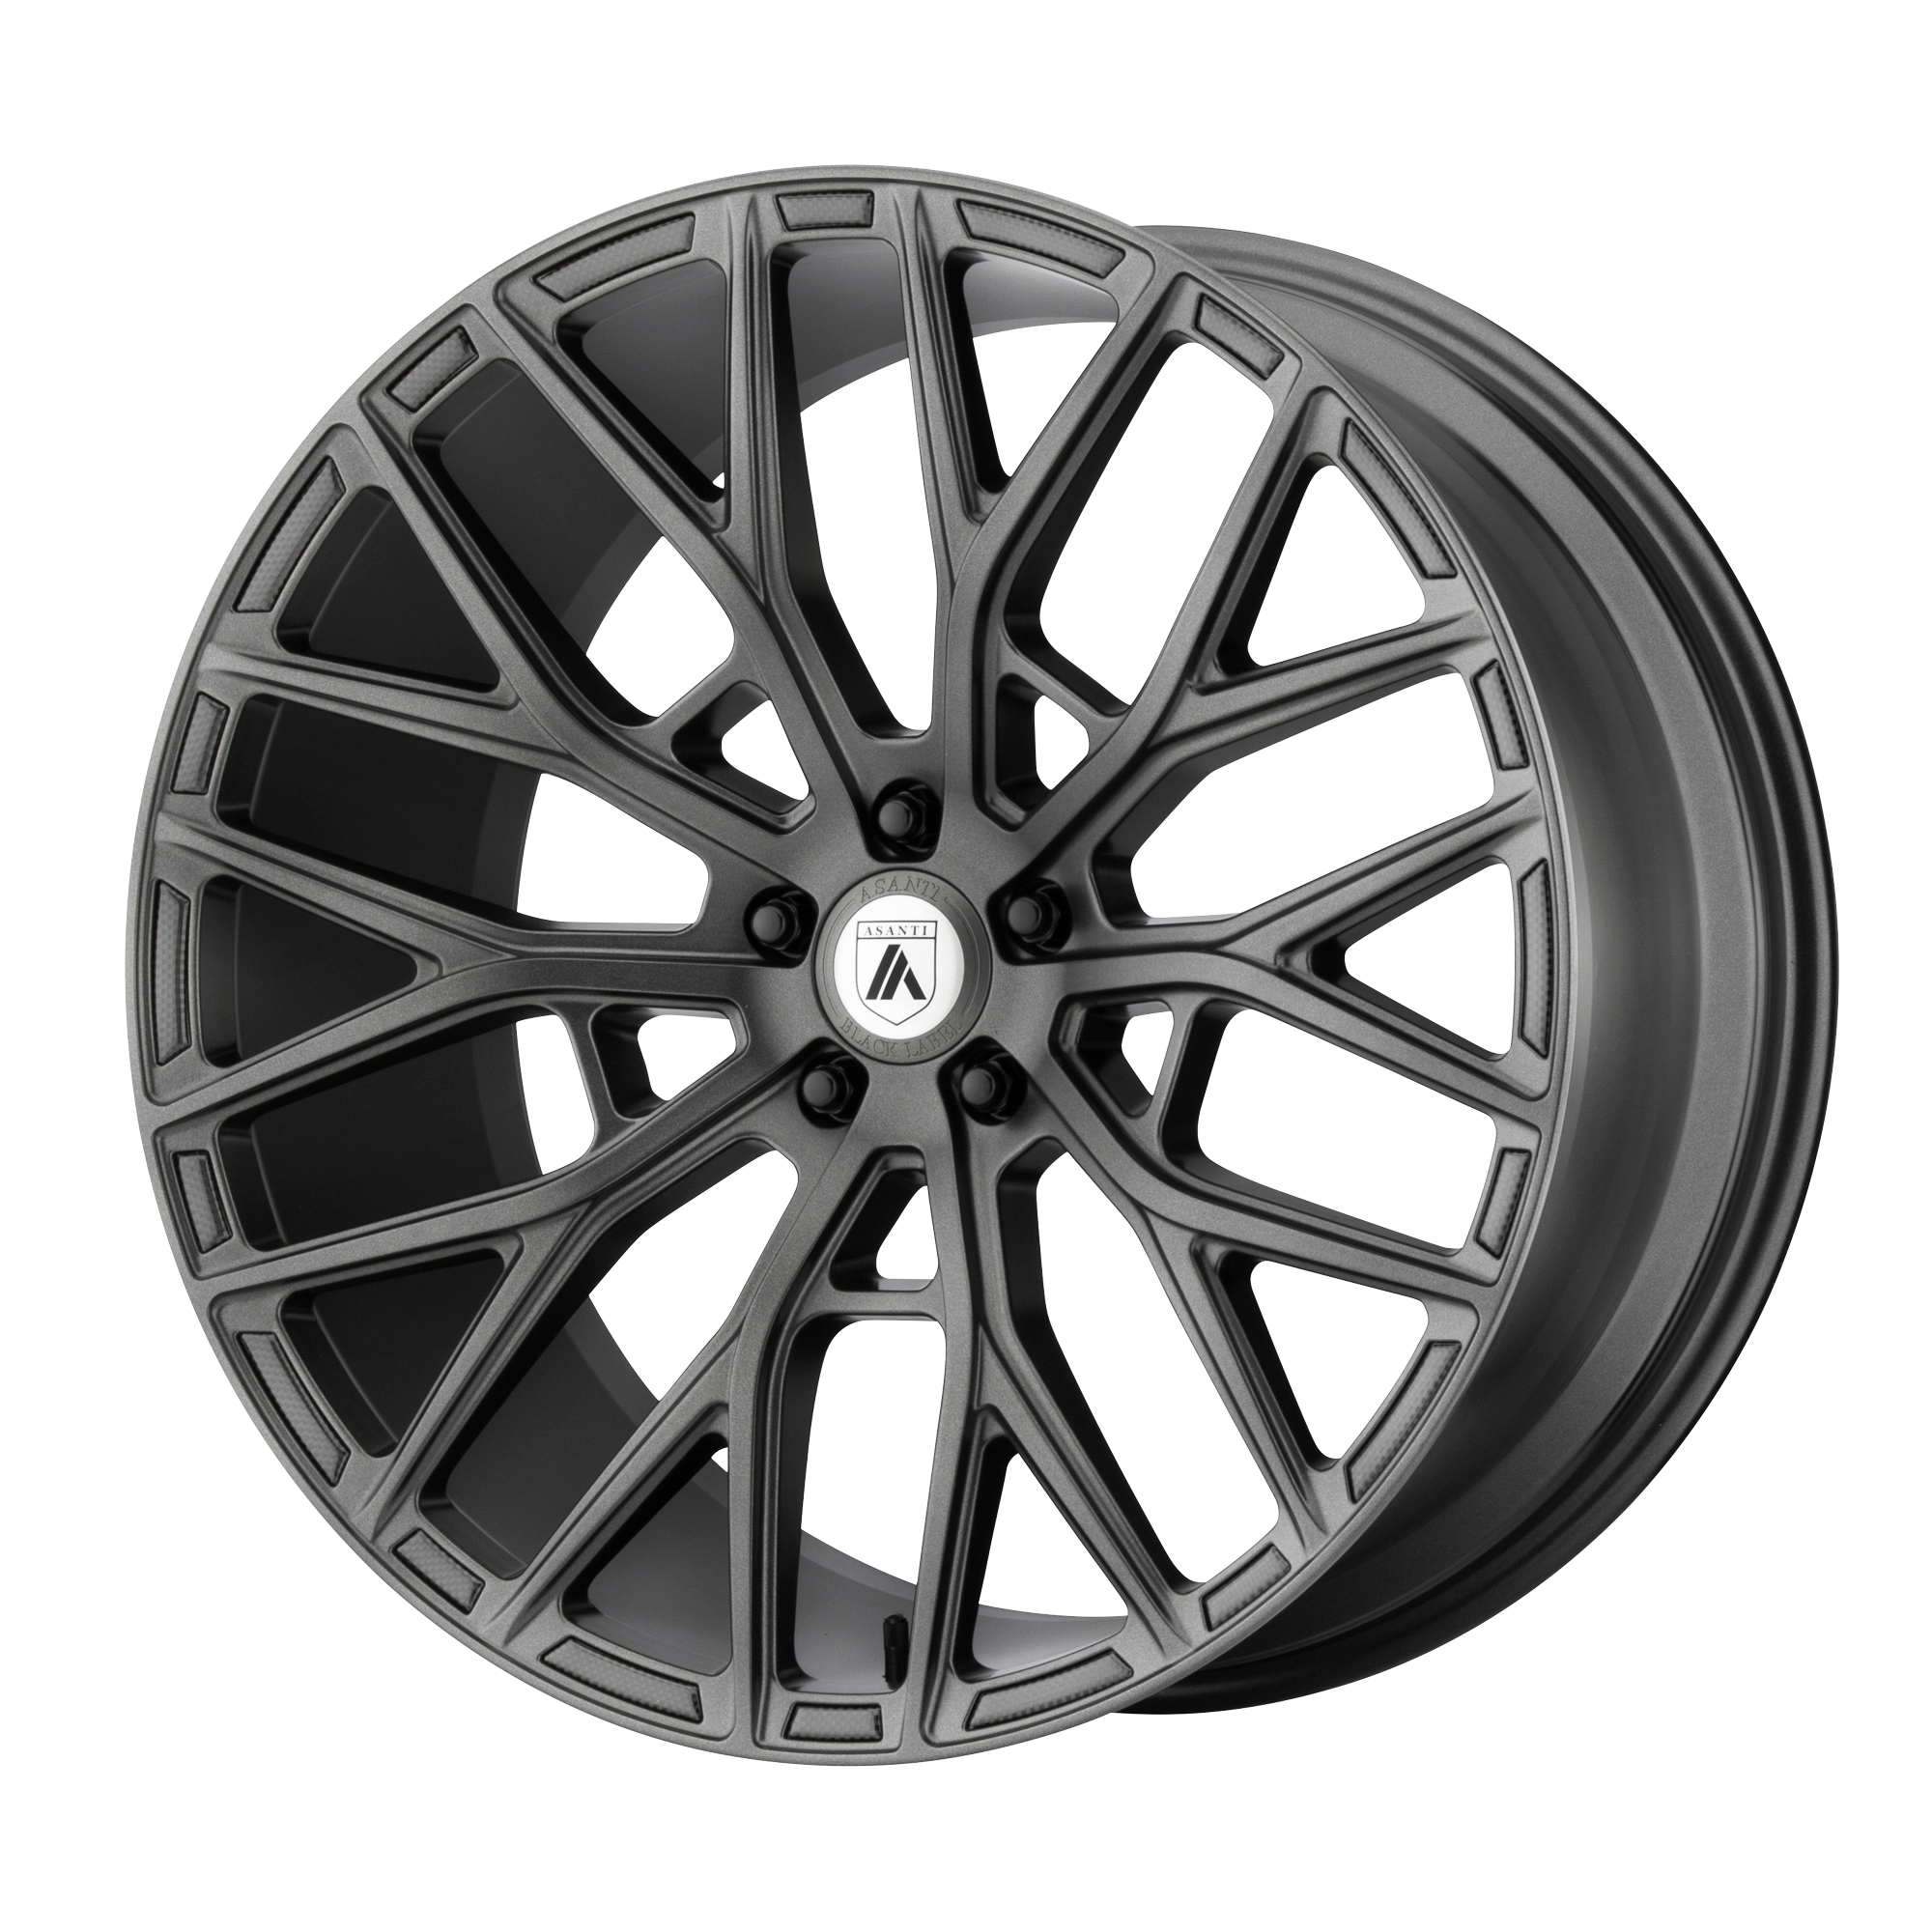 LEO 20x9 5x115.00 MATTE GRAPHITE (15 mm) - Tires and Engine Performance